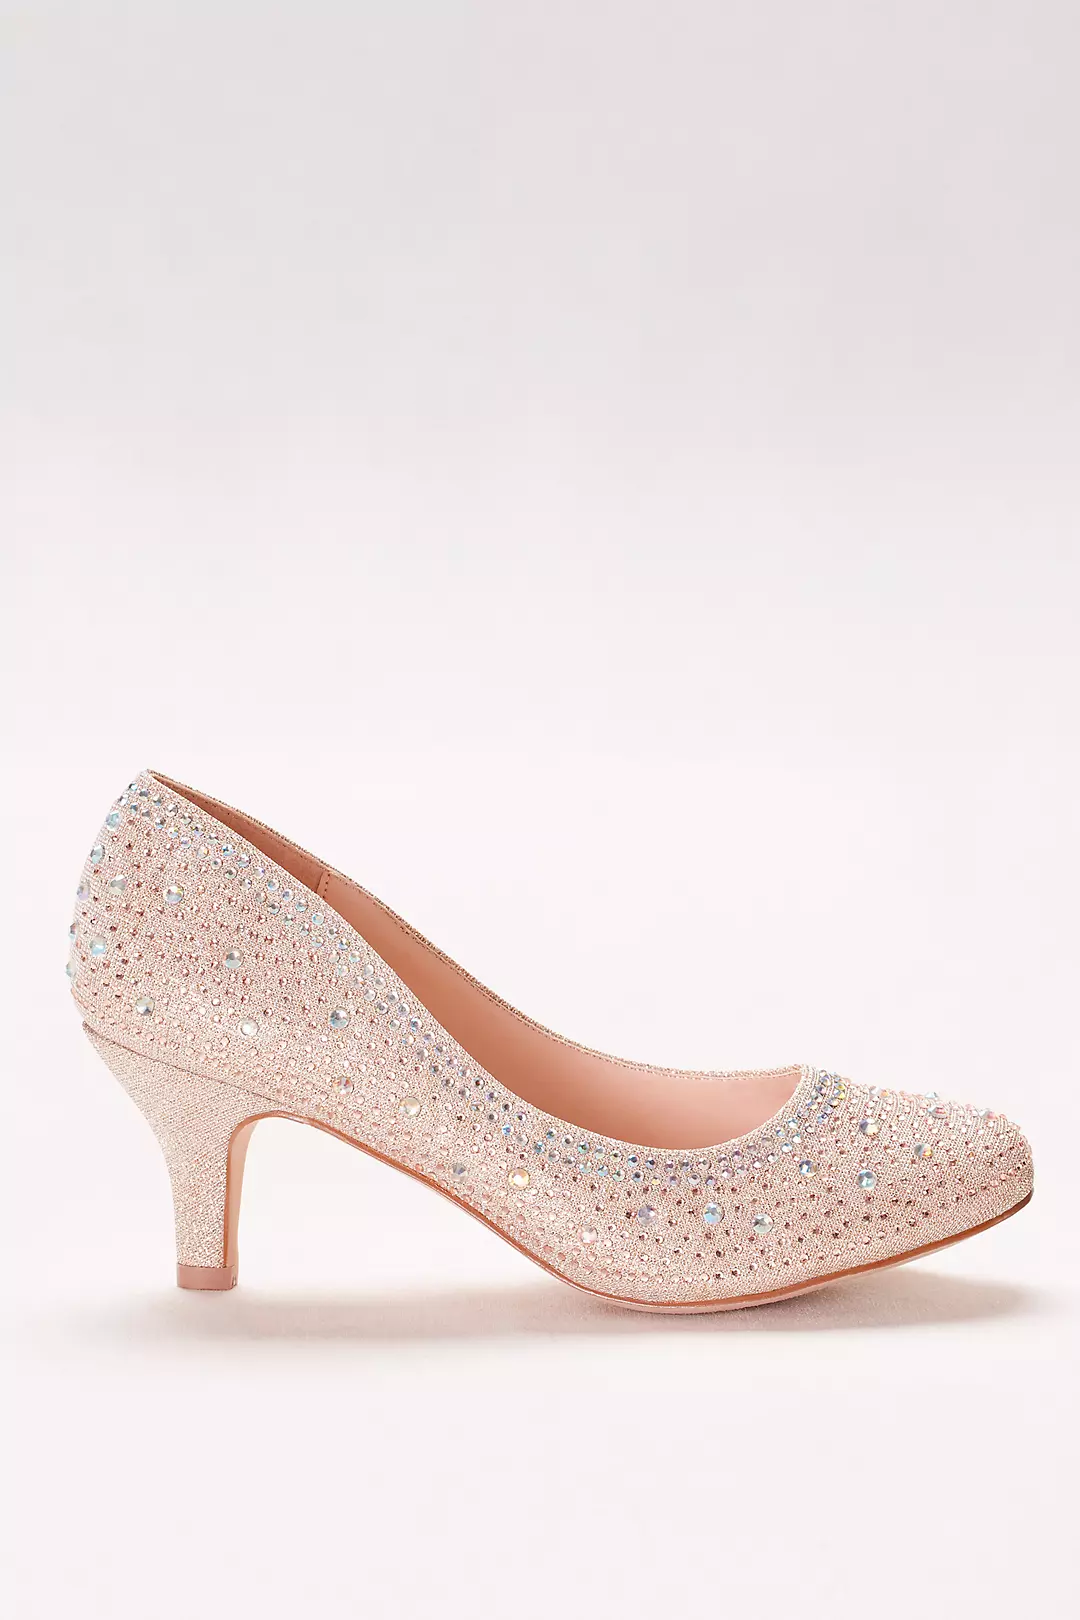 Low-Heeled Pumps with Crystal Embellishment Image 3